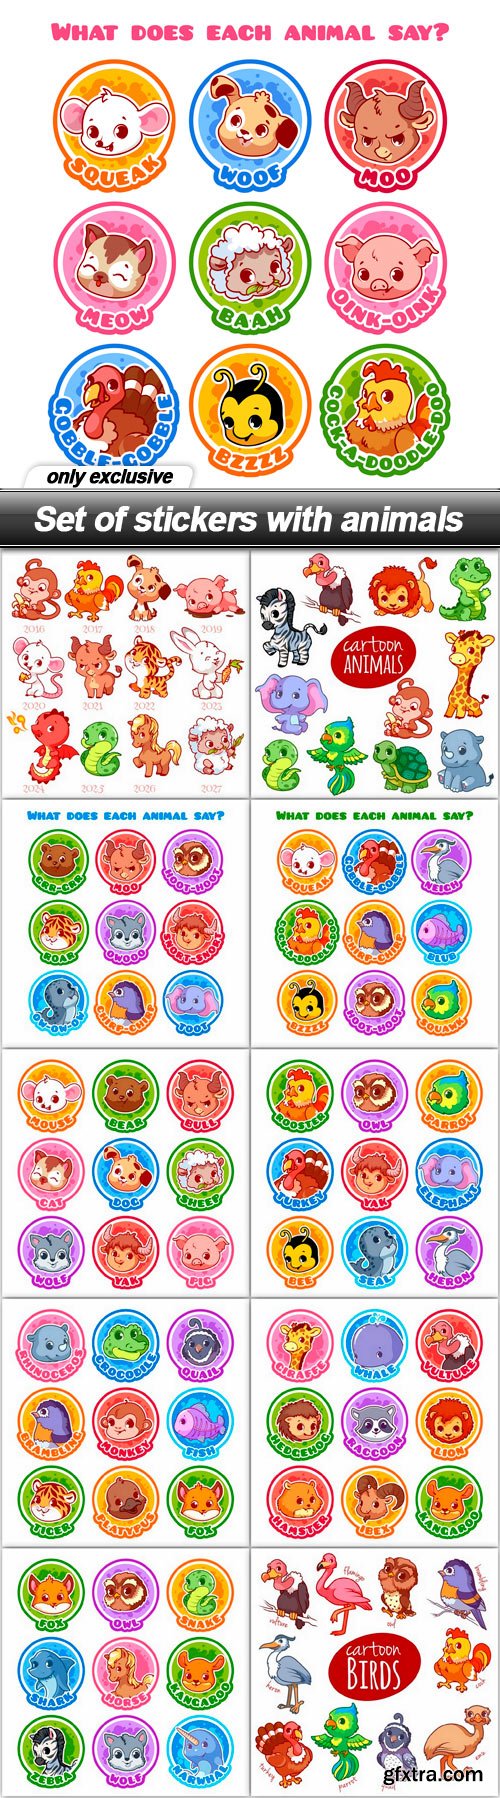 Set of stickers with animals - 11 EPS